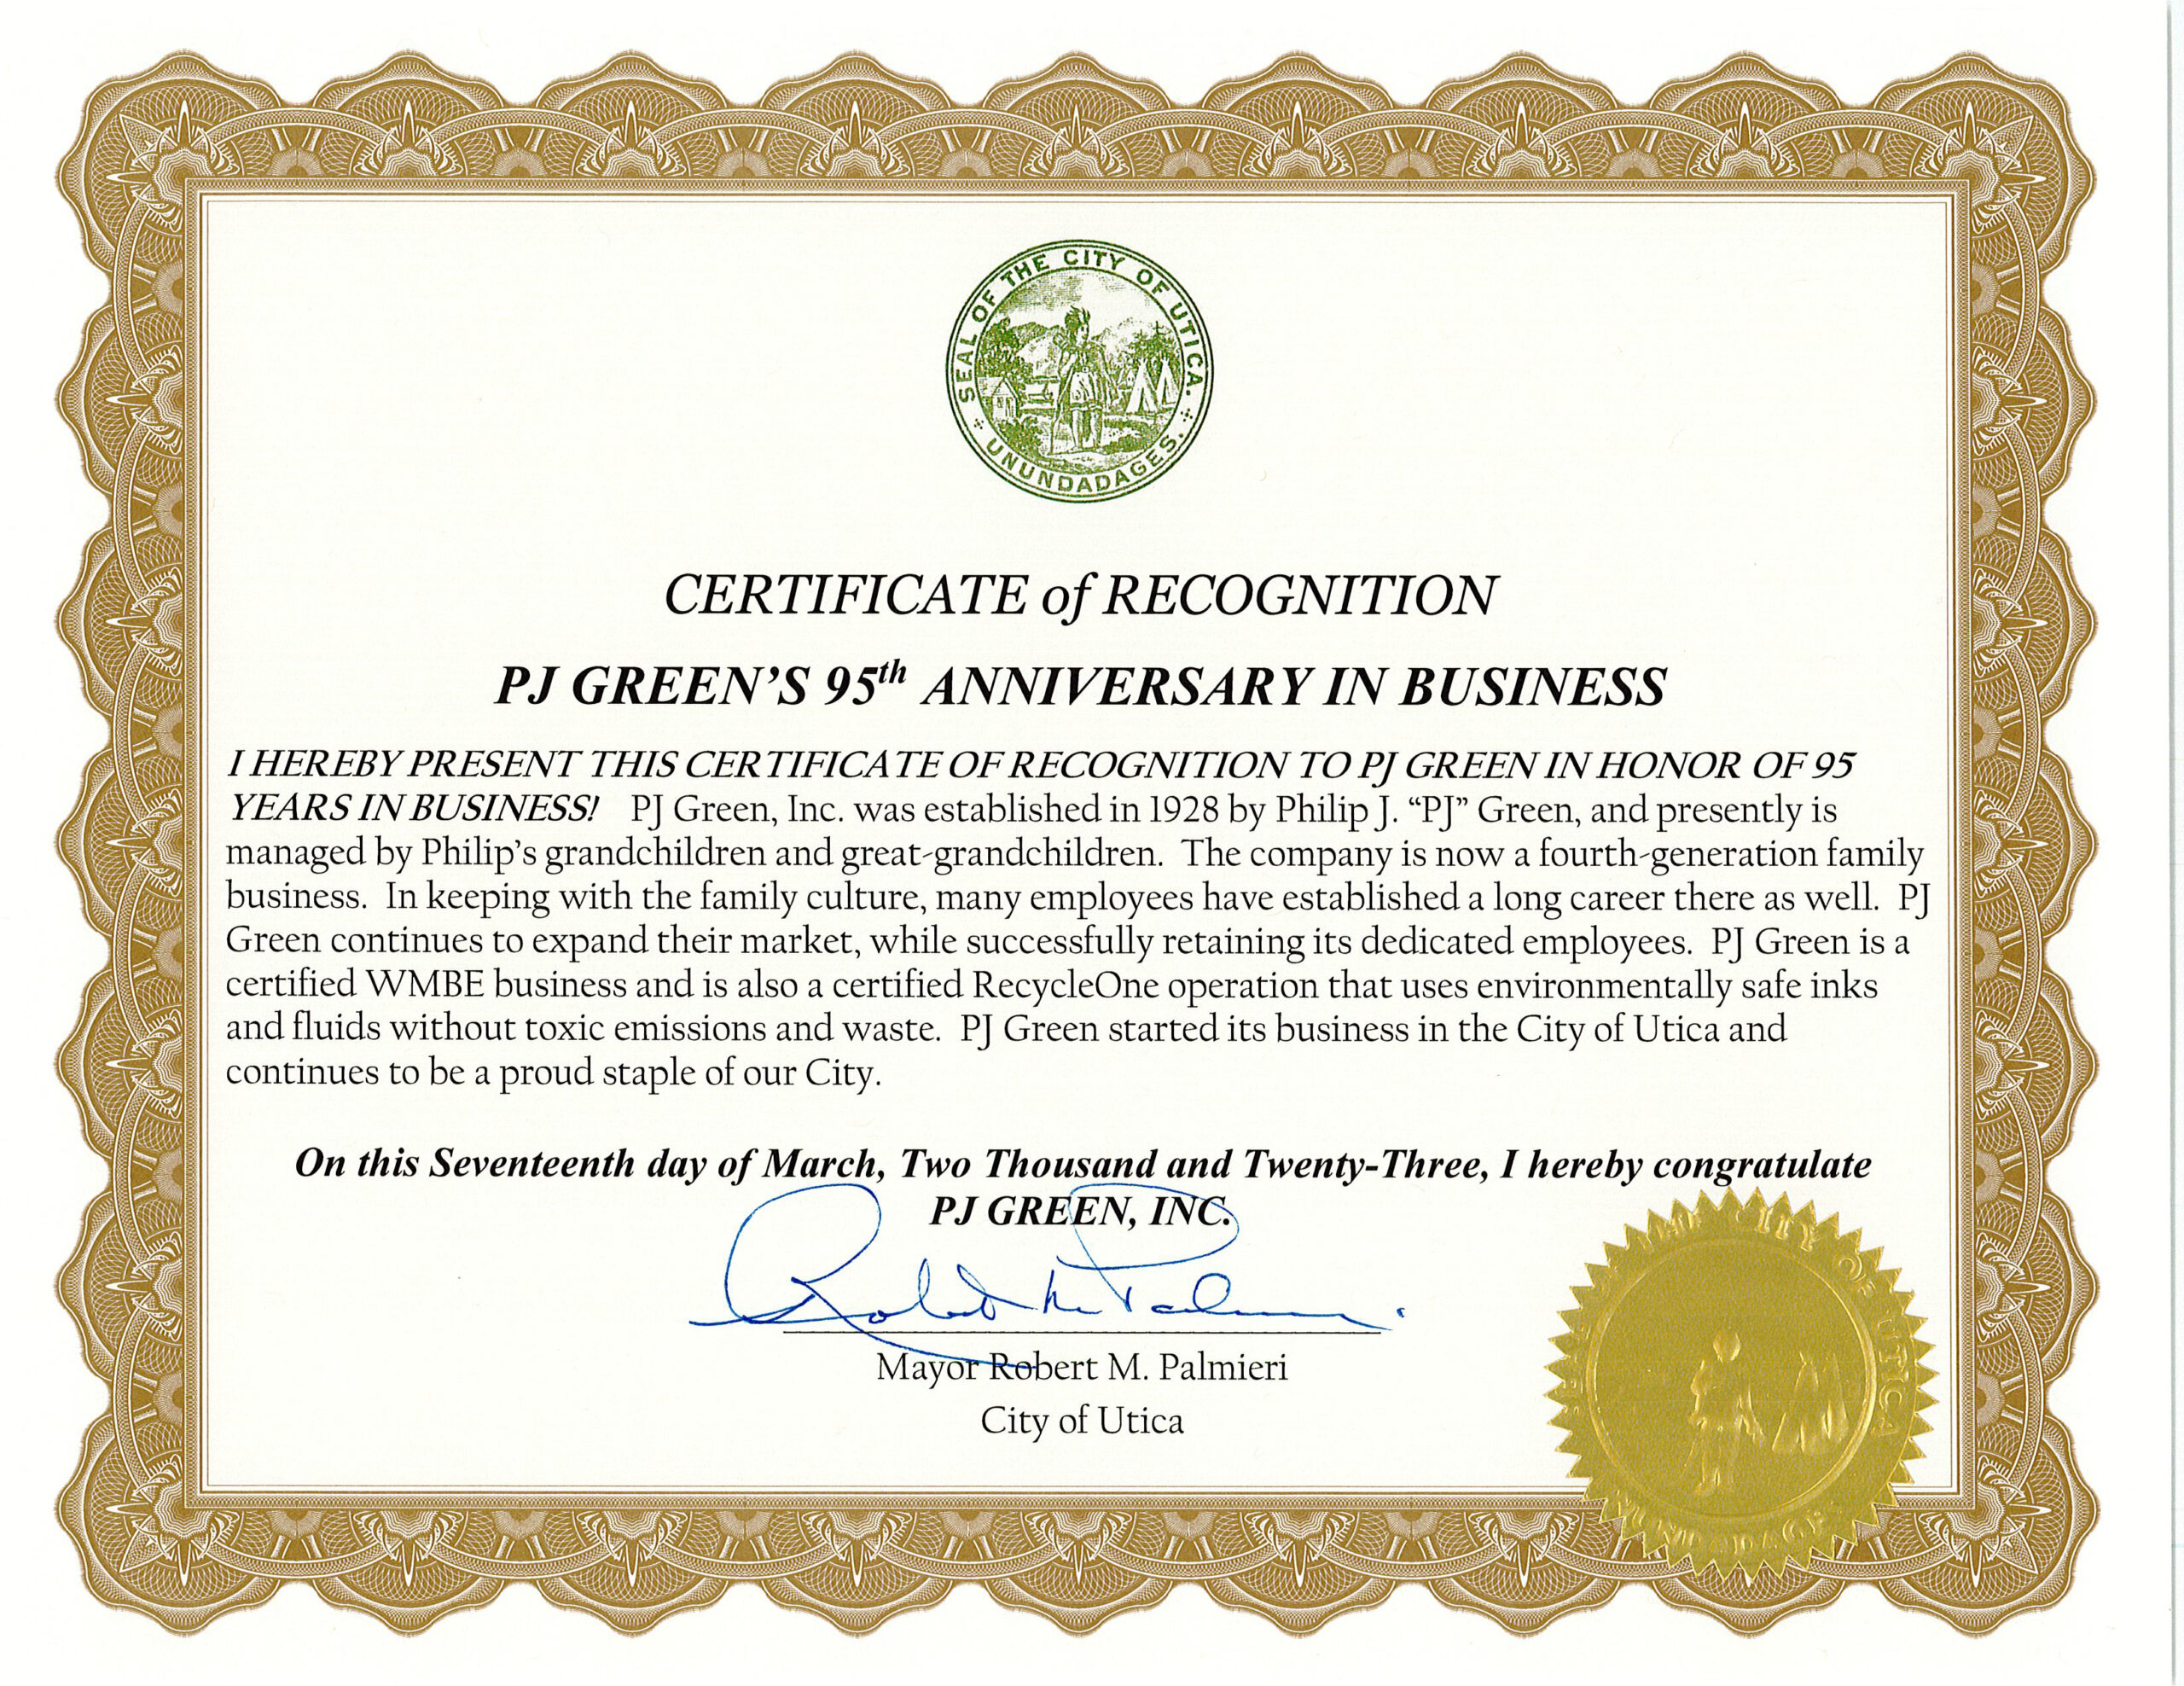 Certificate of Recognition from City of Utica Mayor Robert Palmieri